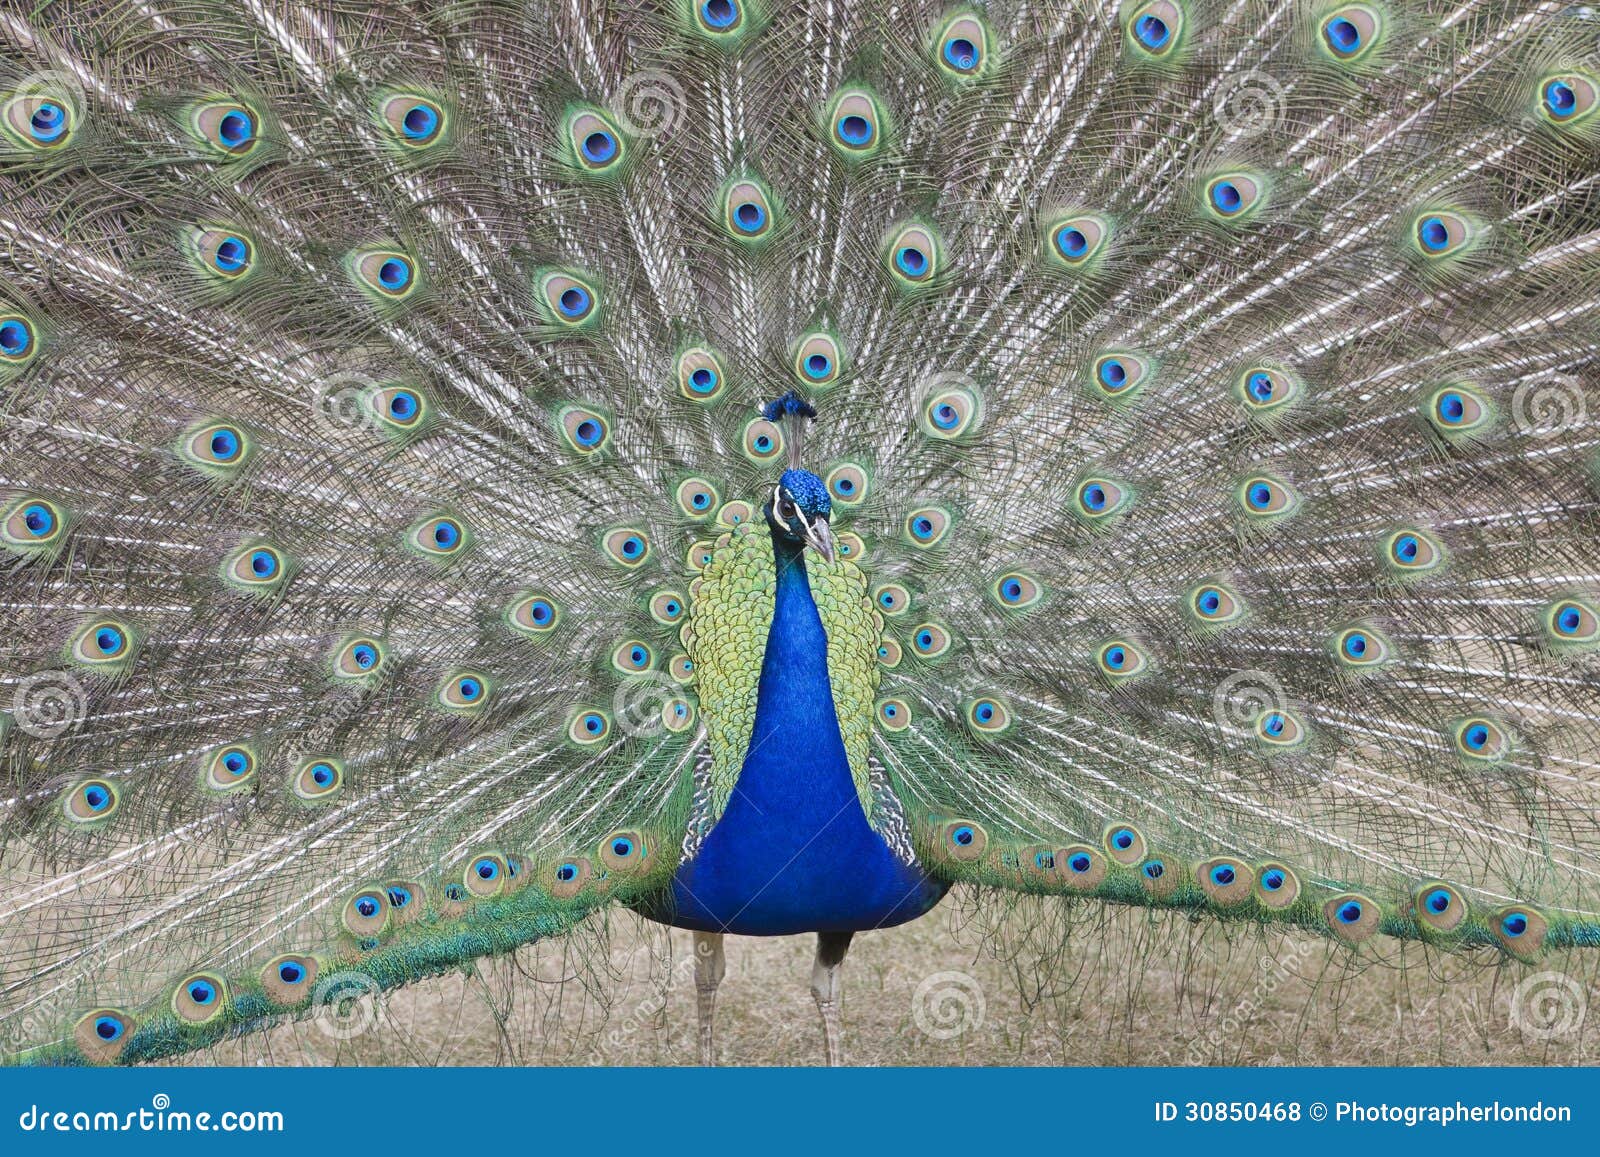 indian peafowl pavo cristatus (asiatic)with tail feathers displayed in courtship ritual